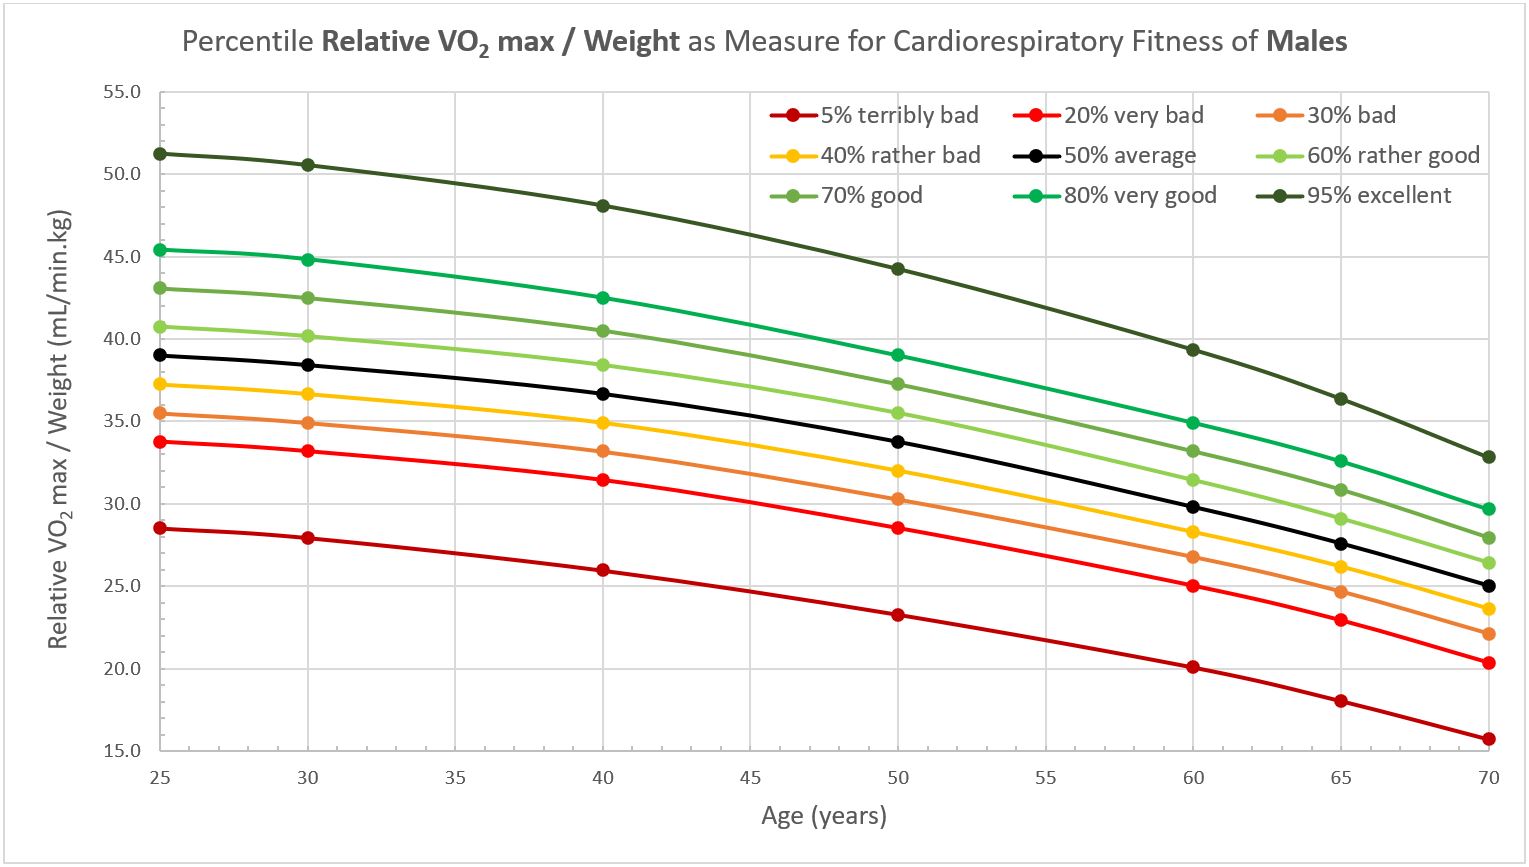 Relative VO2 max over weight reference chart for males